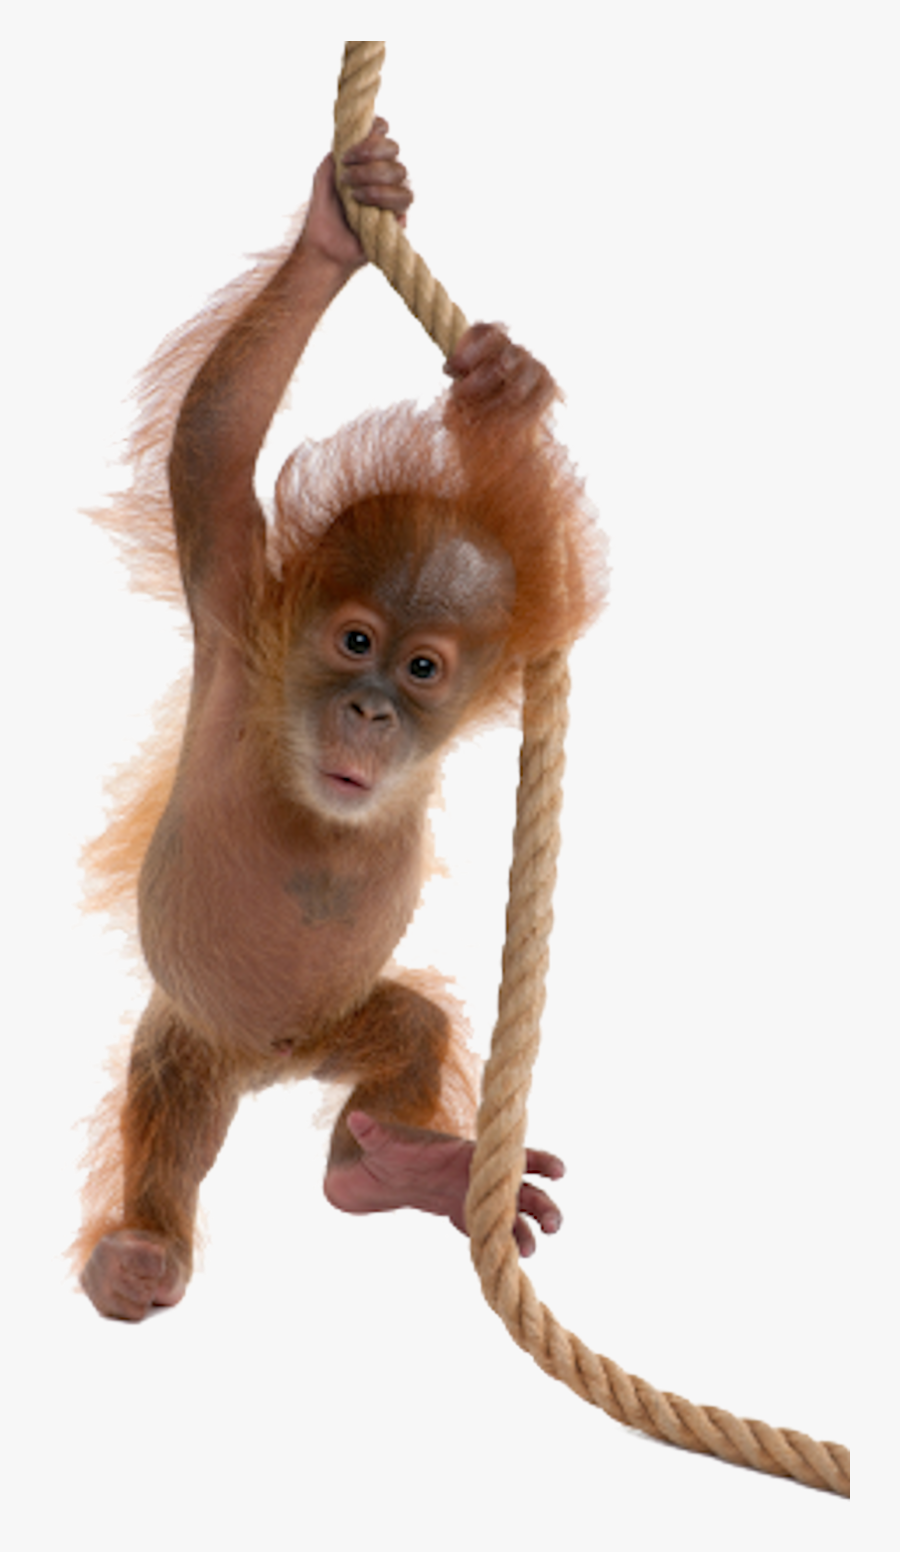 Real Baby Monkey Png, Transparent Clipart